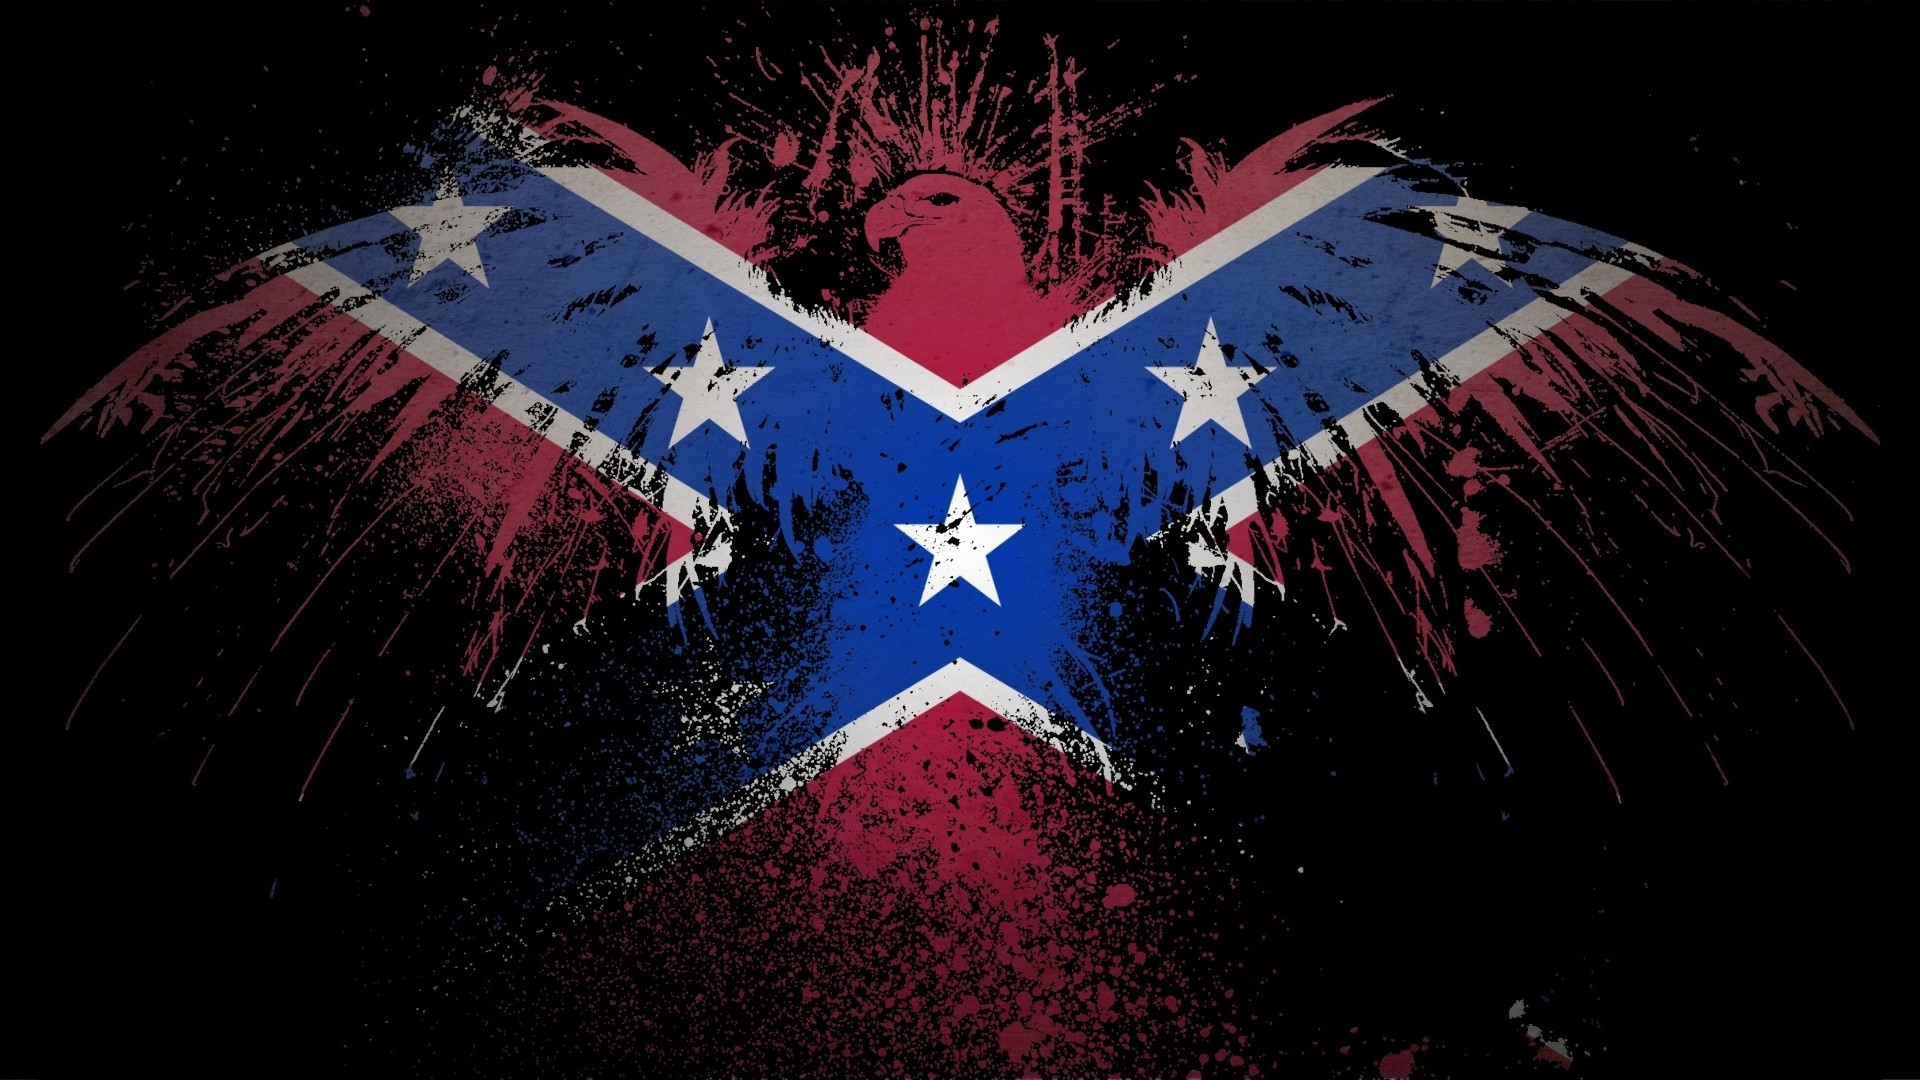 1920x1080 Title : 39+ confederate flag wallpapers. Dimension : 1920 x 1080. File Type  : JPG/JPEG